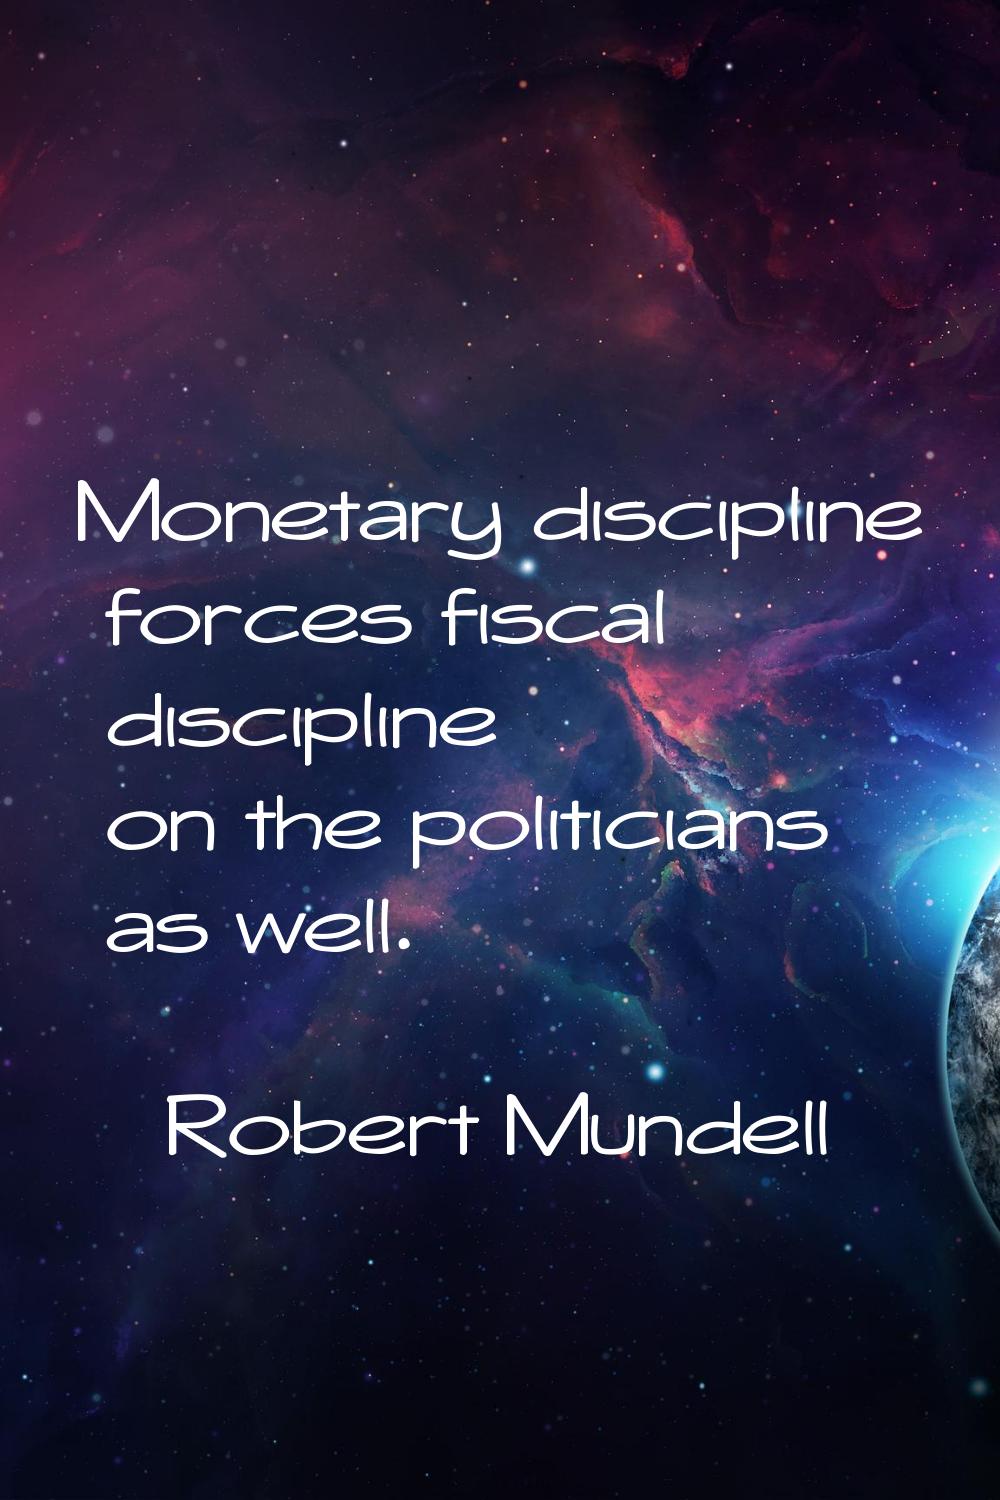 Monetary discipline forces fiscal discipline on the politicians as well.